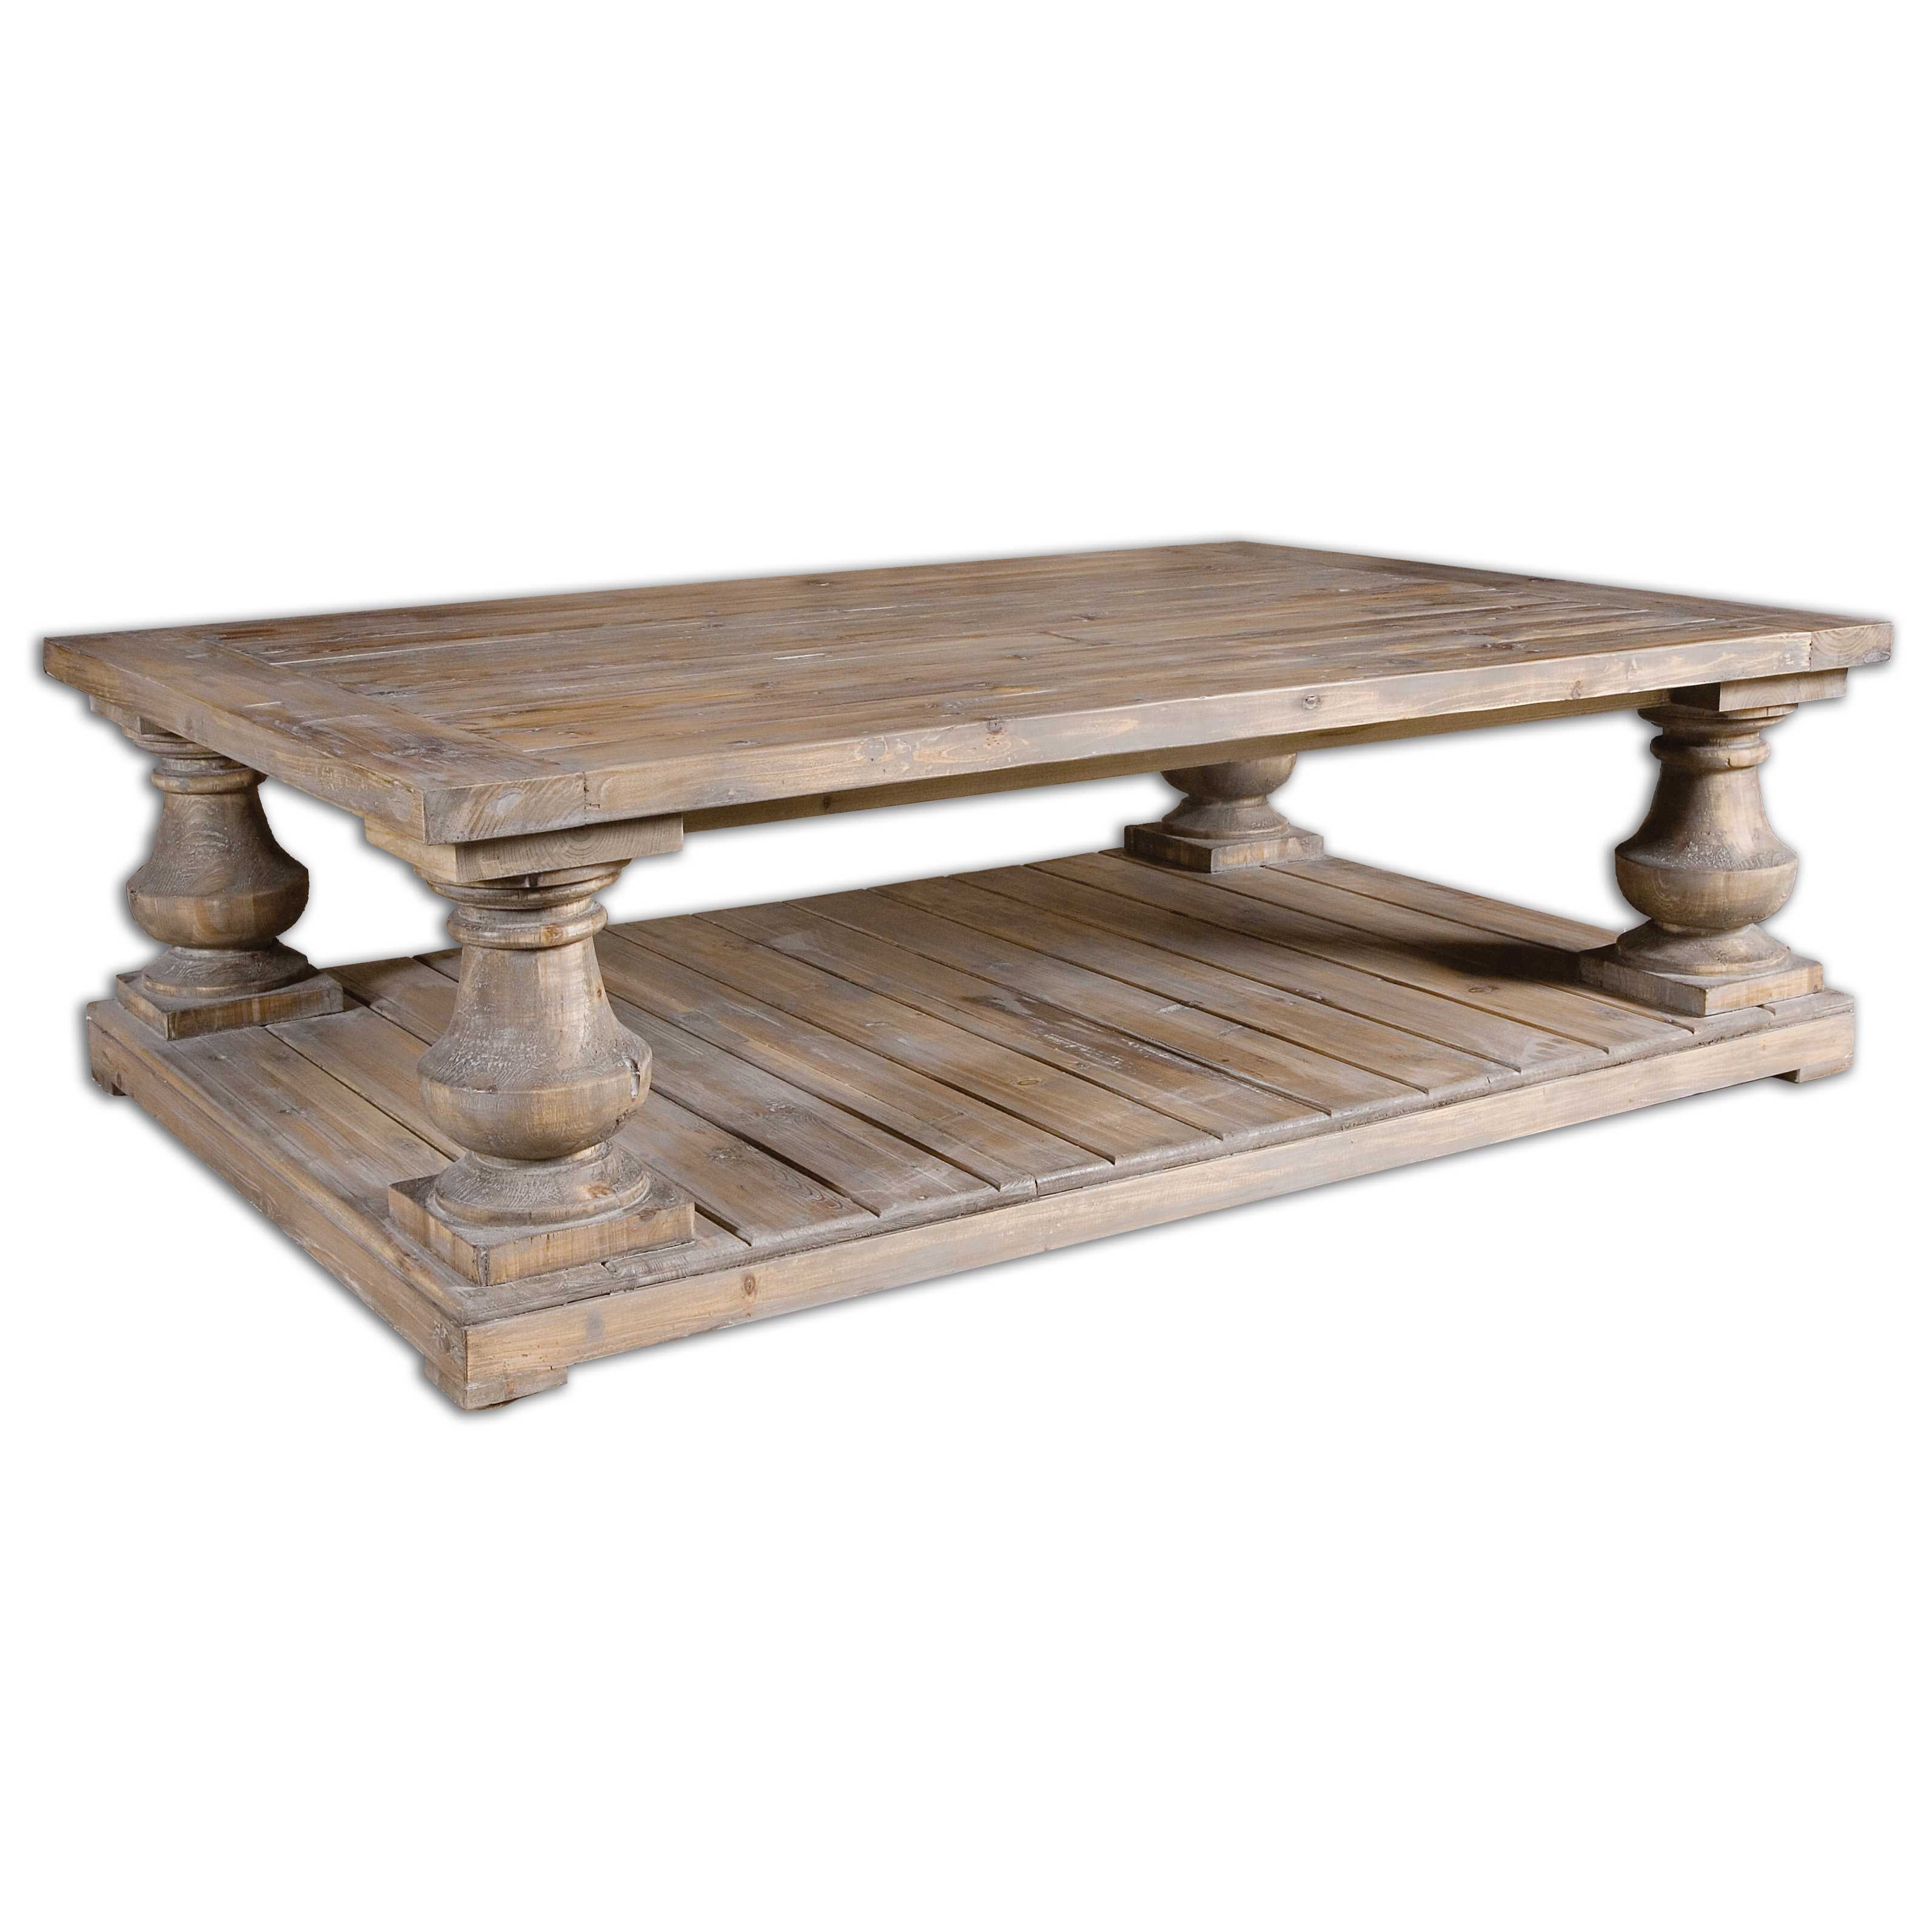 Stratford Rustic Coffee Table - Image 1